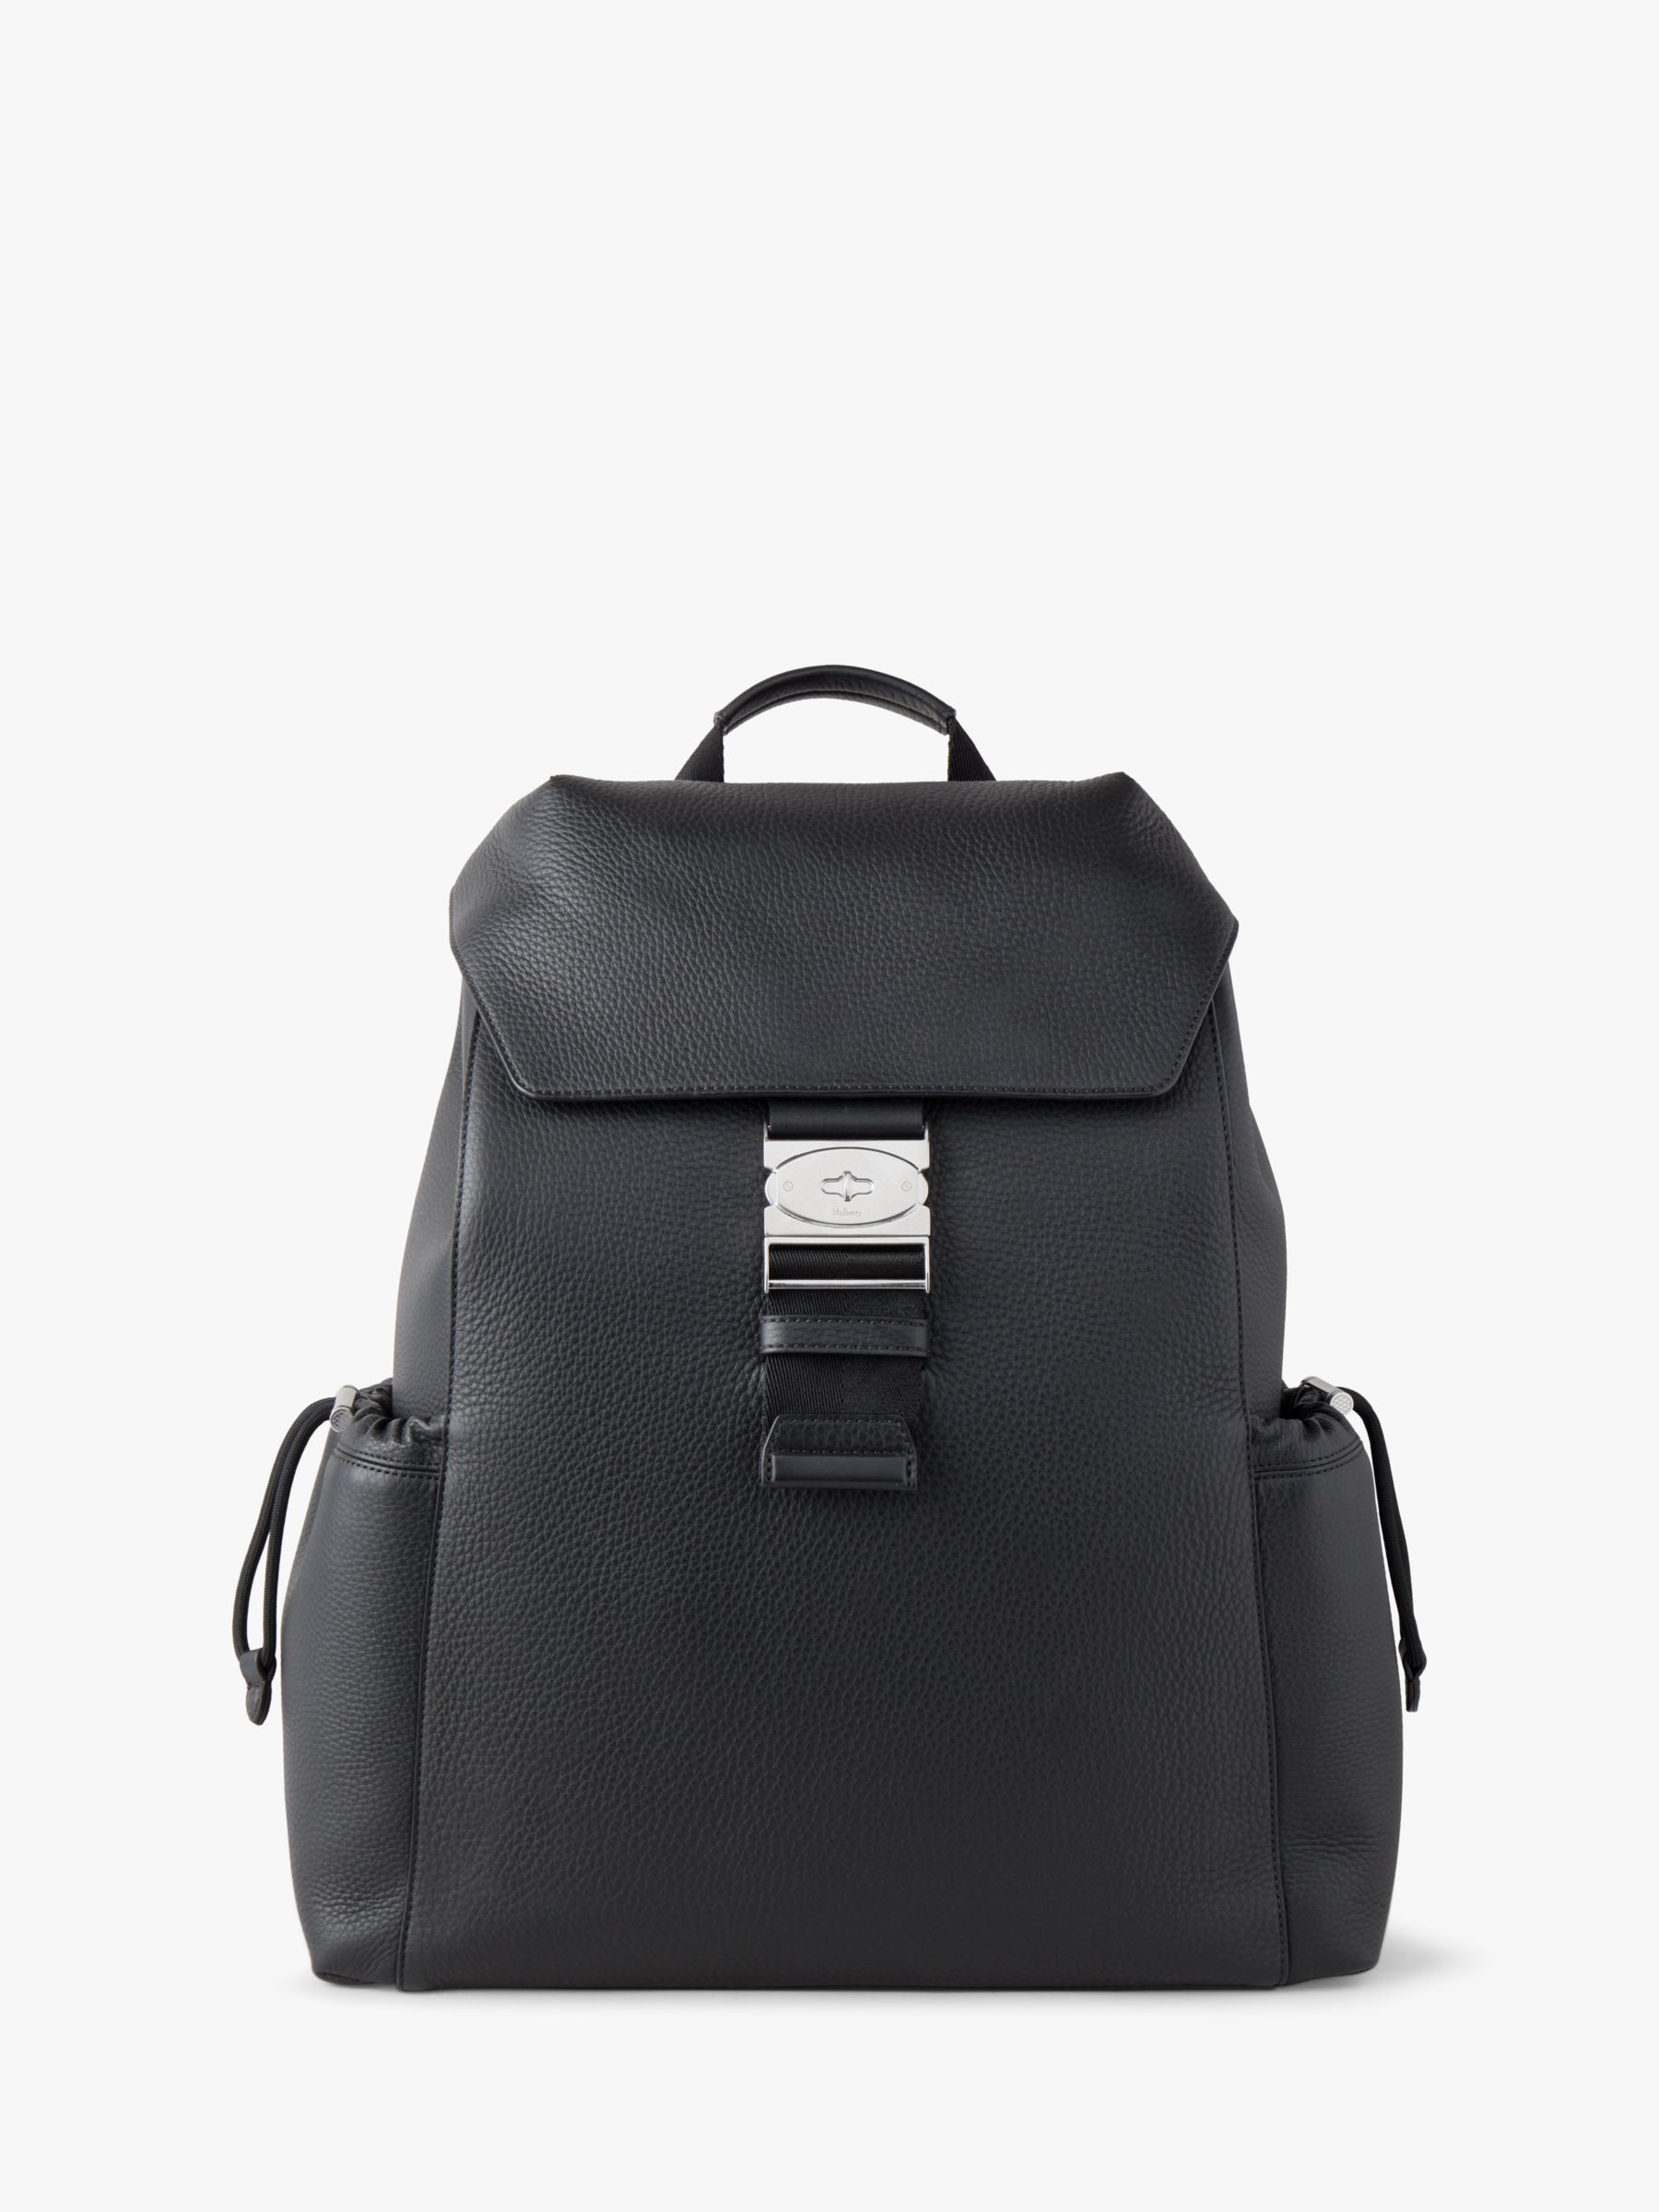 Mulberry Utility Postman's Buckle Heavy Grain Leather Backpack, Black